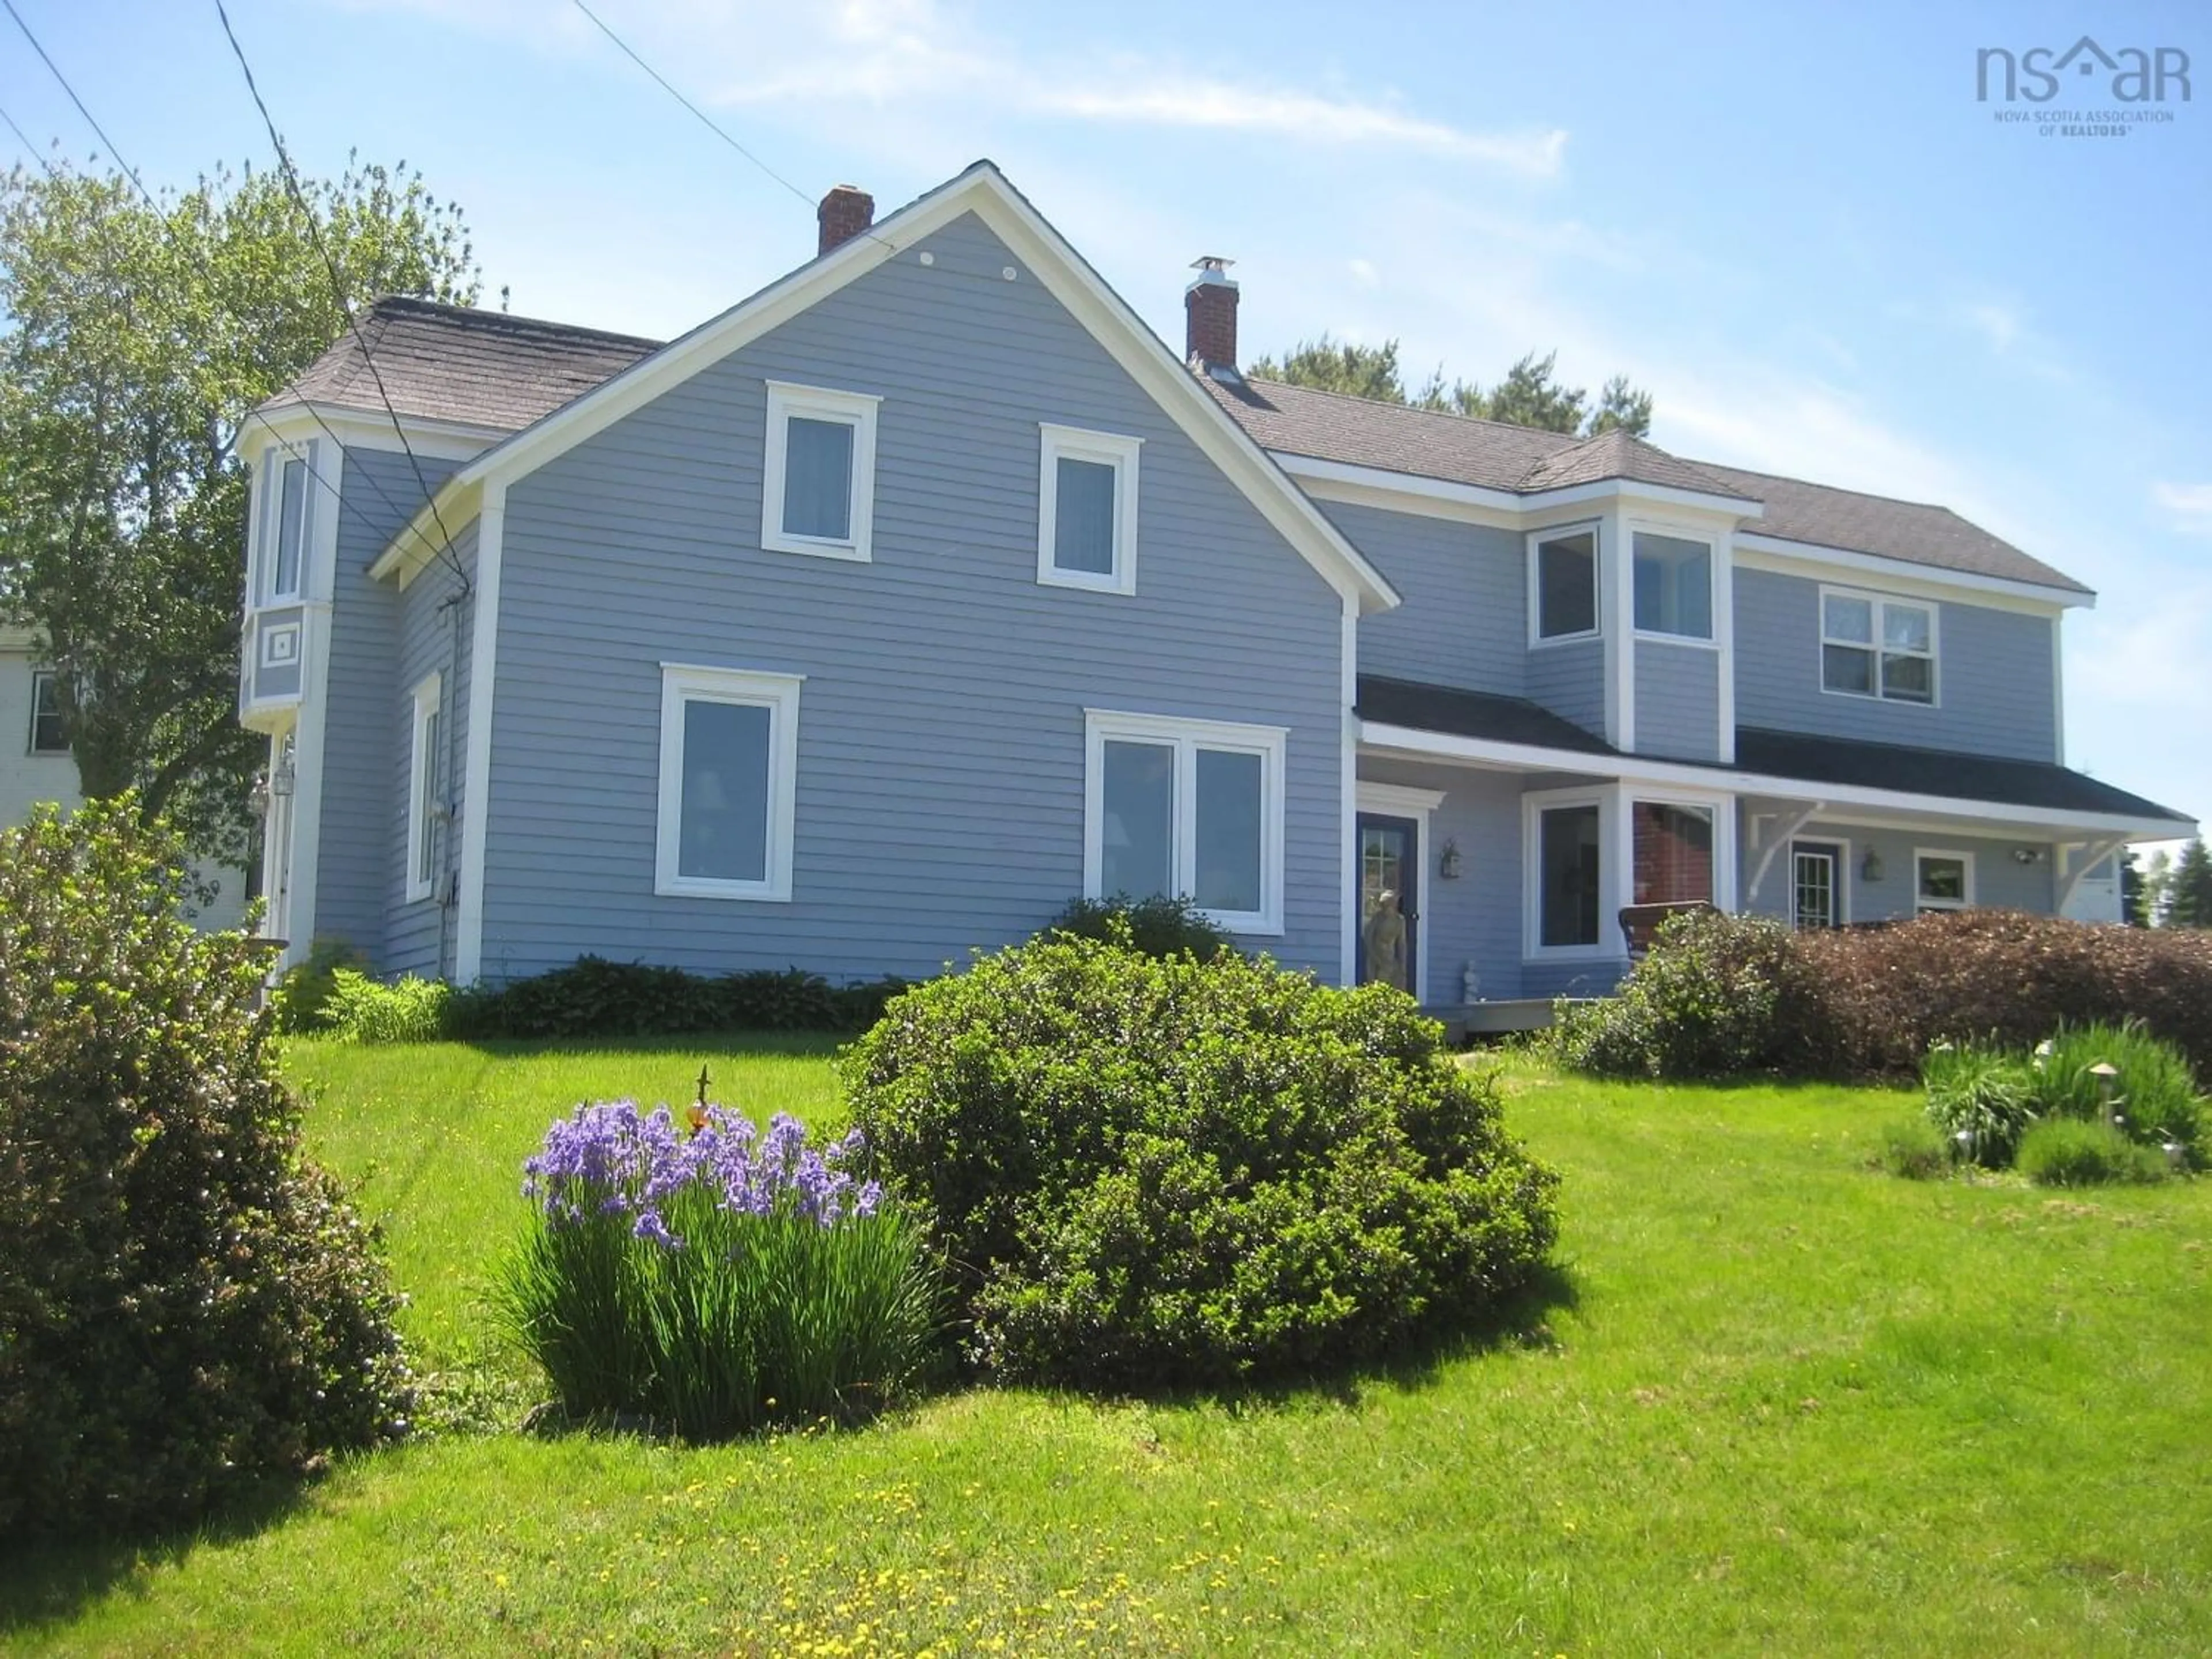 A pic from exterior of the house or condo for 5888 331 Hwy, Petite Rivière Nova Scotia B0J 2T0